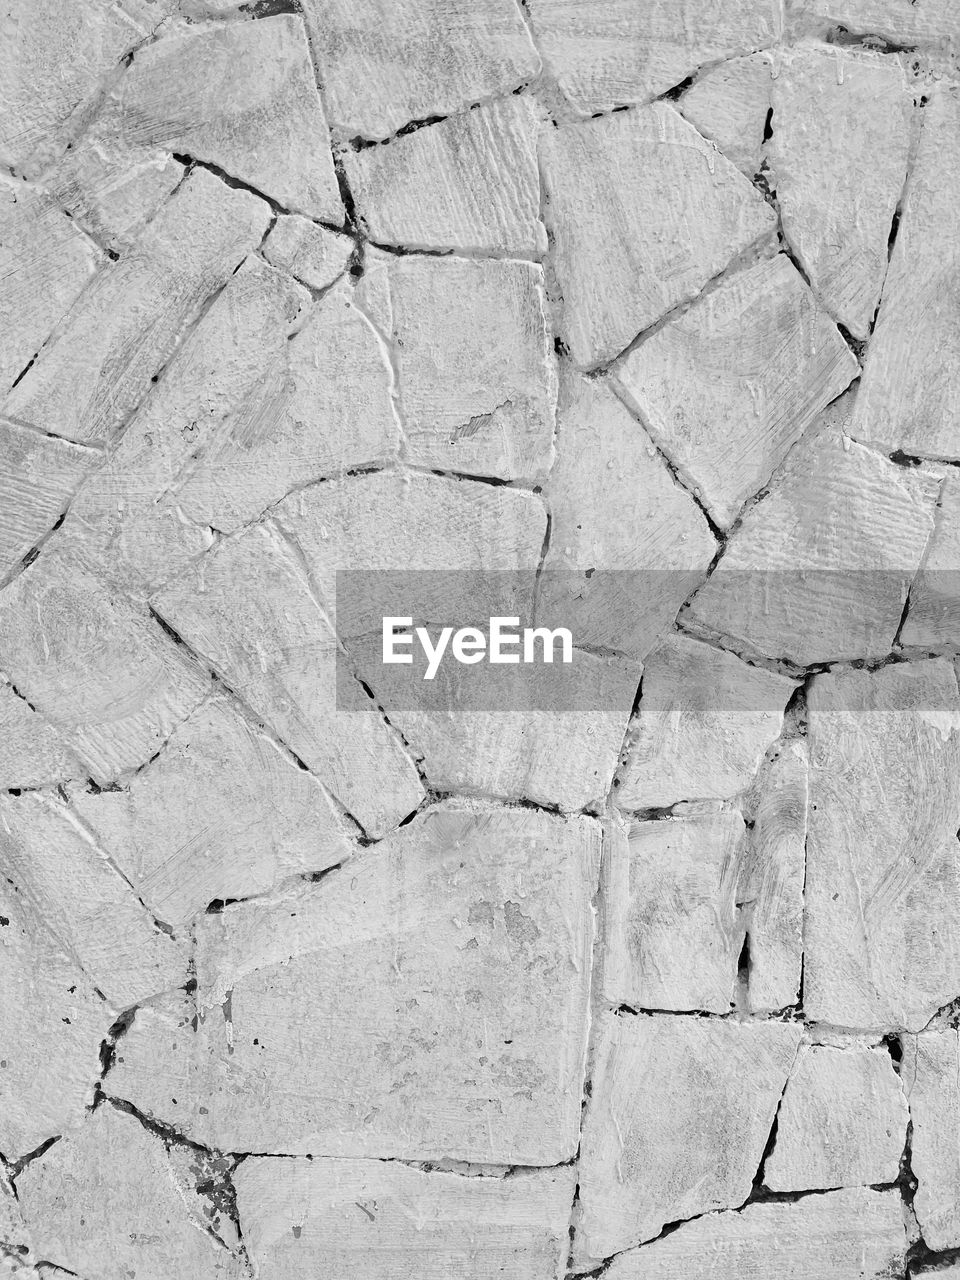 backgrounds, full frame, pattern, textured, cracked, no people, road surface, stone wall, wall, day, rough, asphalt, floor, black and white, flooring, outdoors, nature, soil, close-up, built structure, high angle view, line, stone material, architecture, arid climate, wall - building feature, monochrome, climate, rock, dry